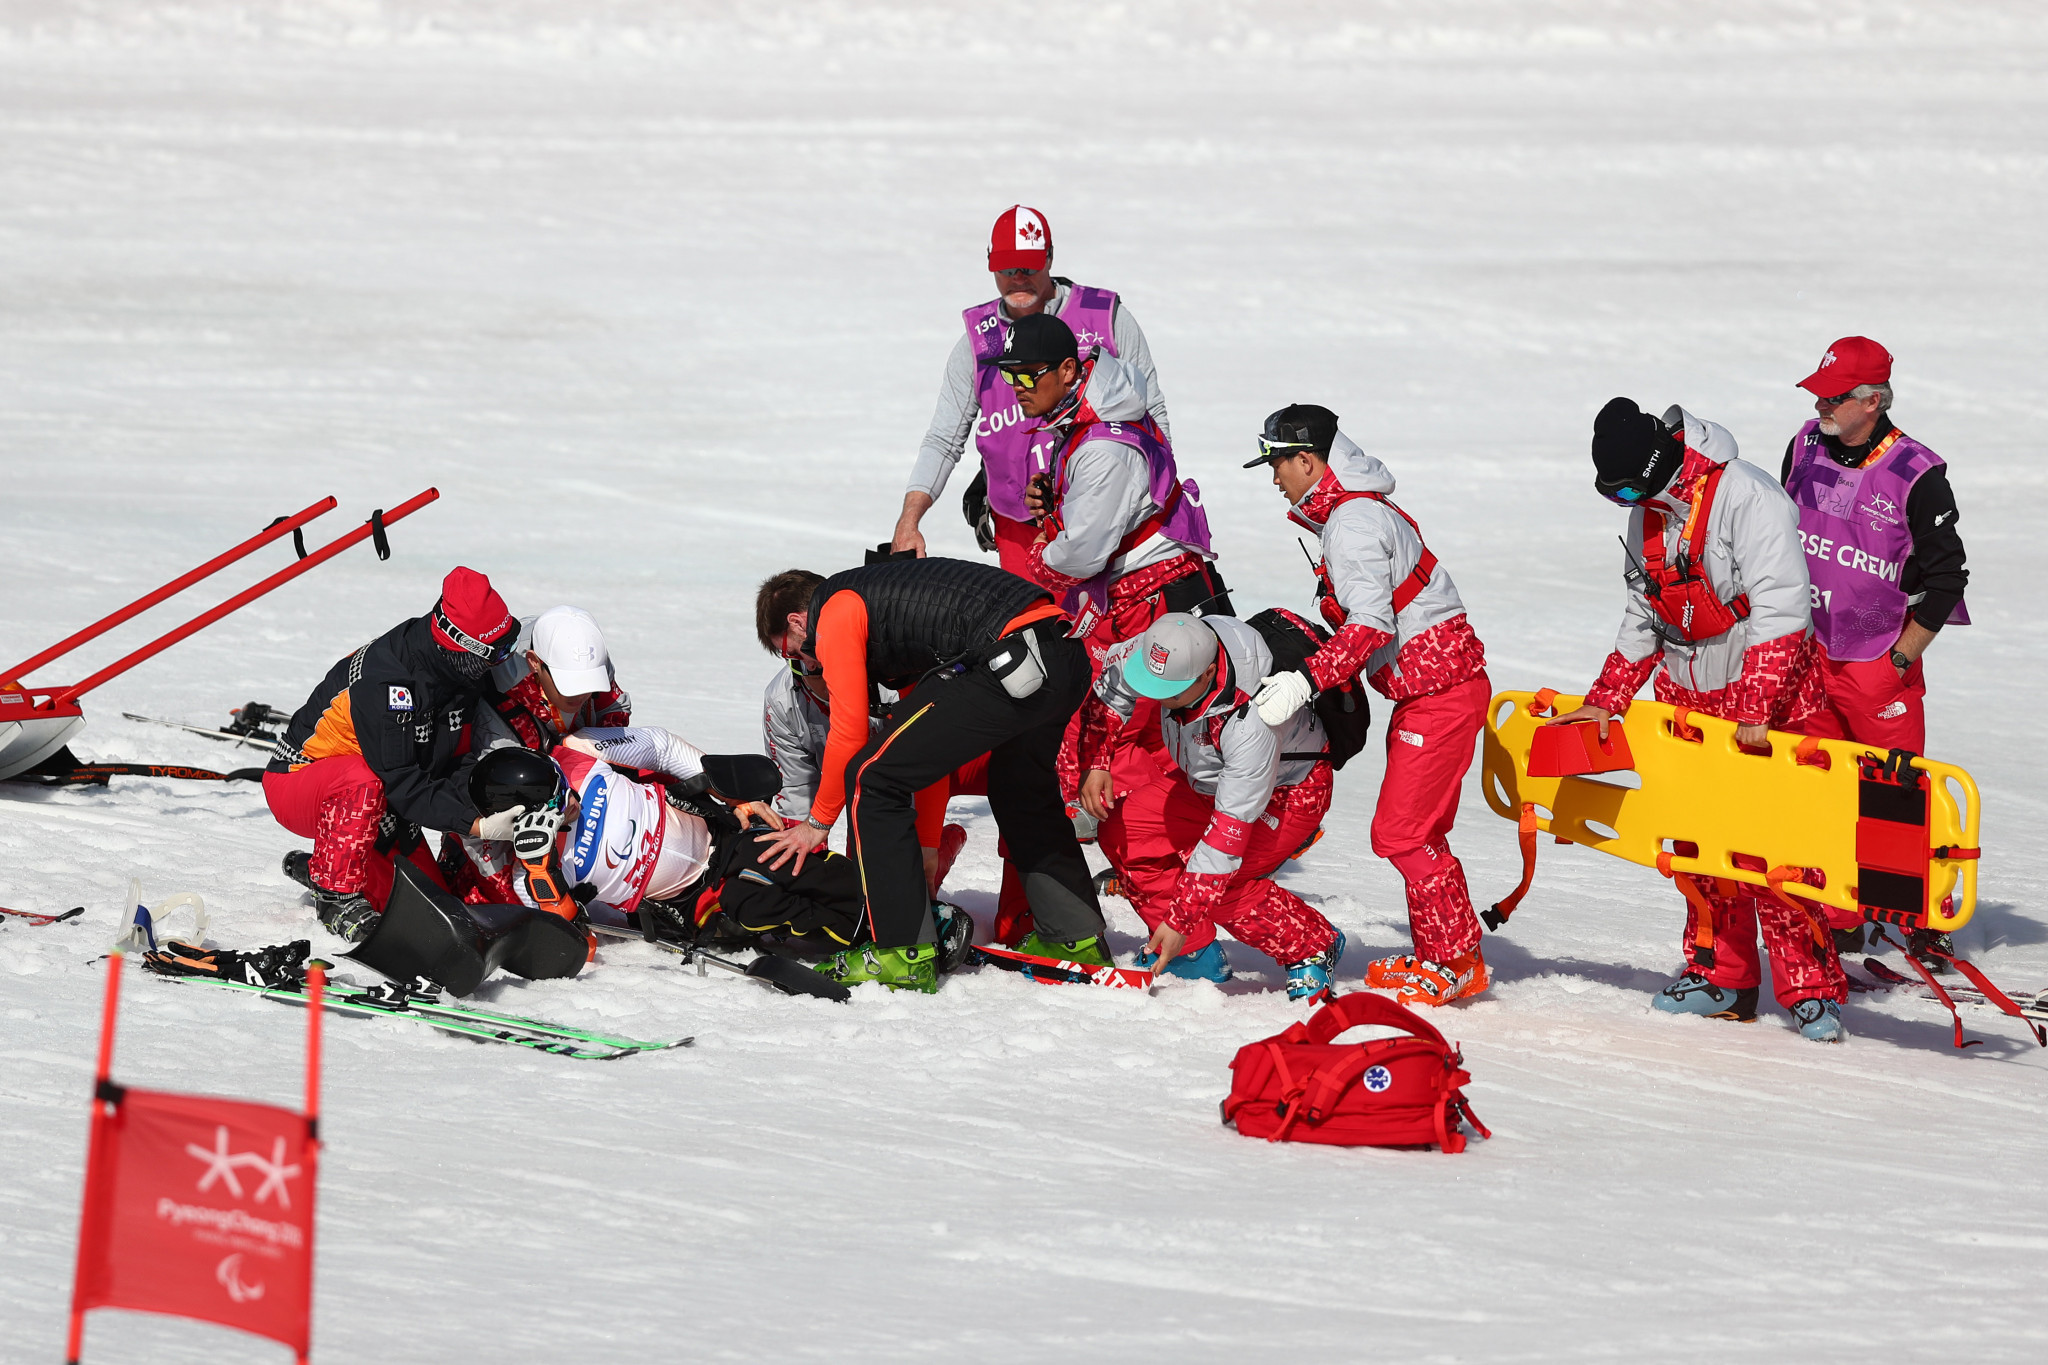 Germany's Georg Kreiter is treated after crashing in the men's giant slalom sitting competition ©Getty Images